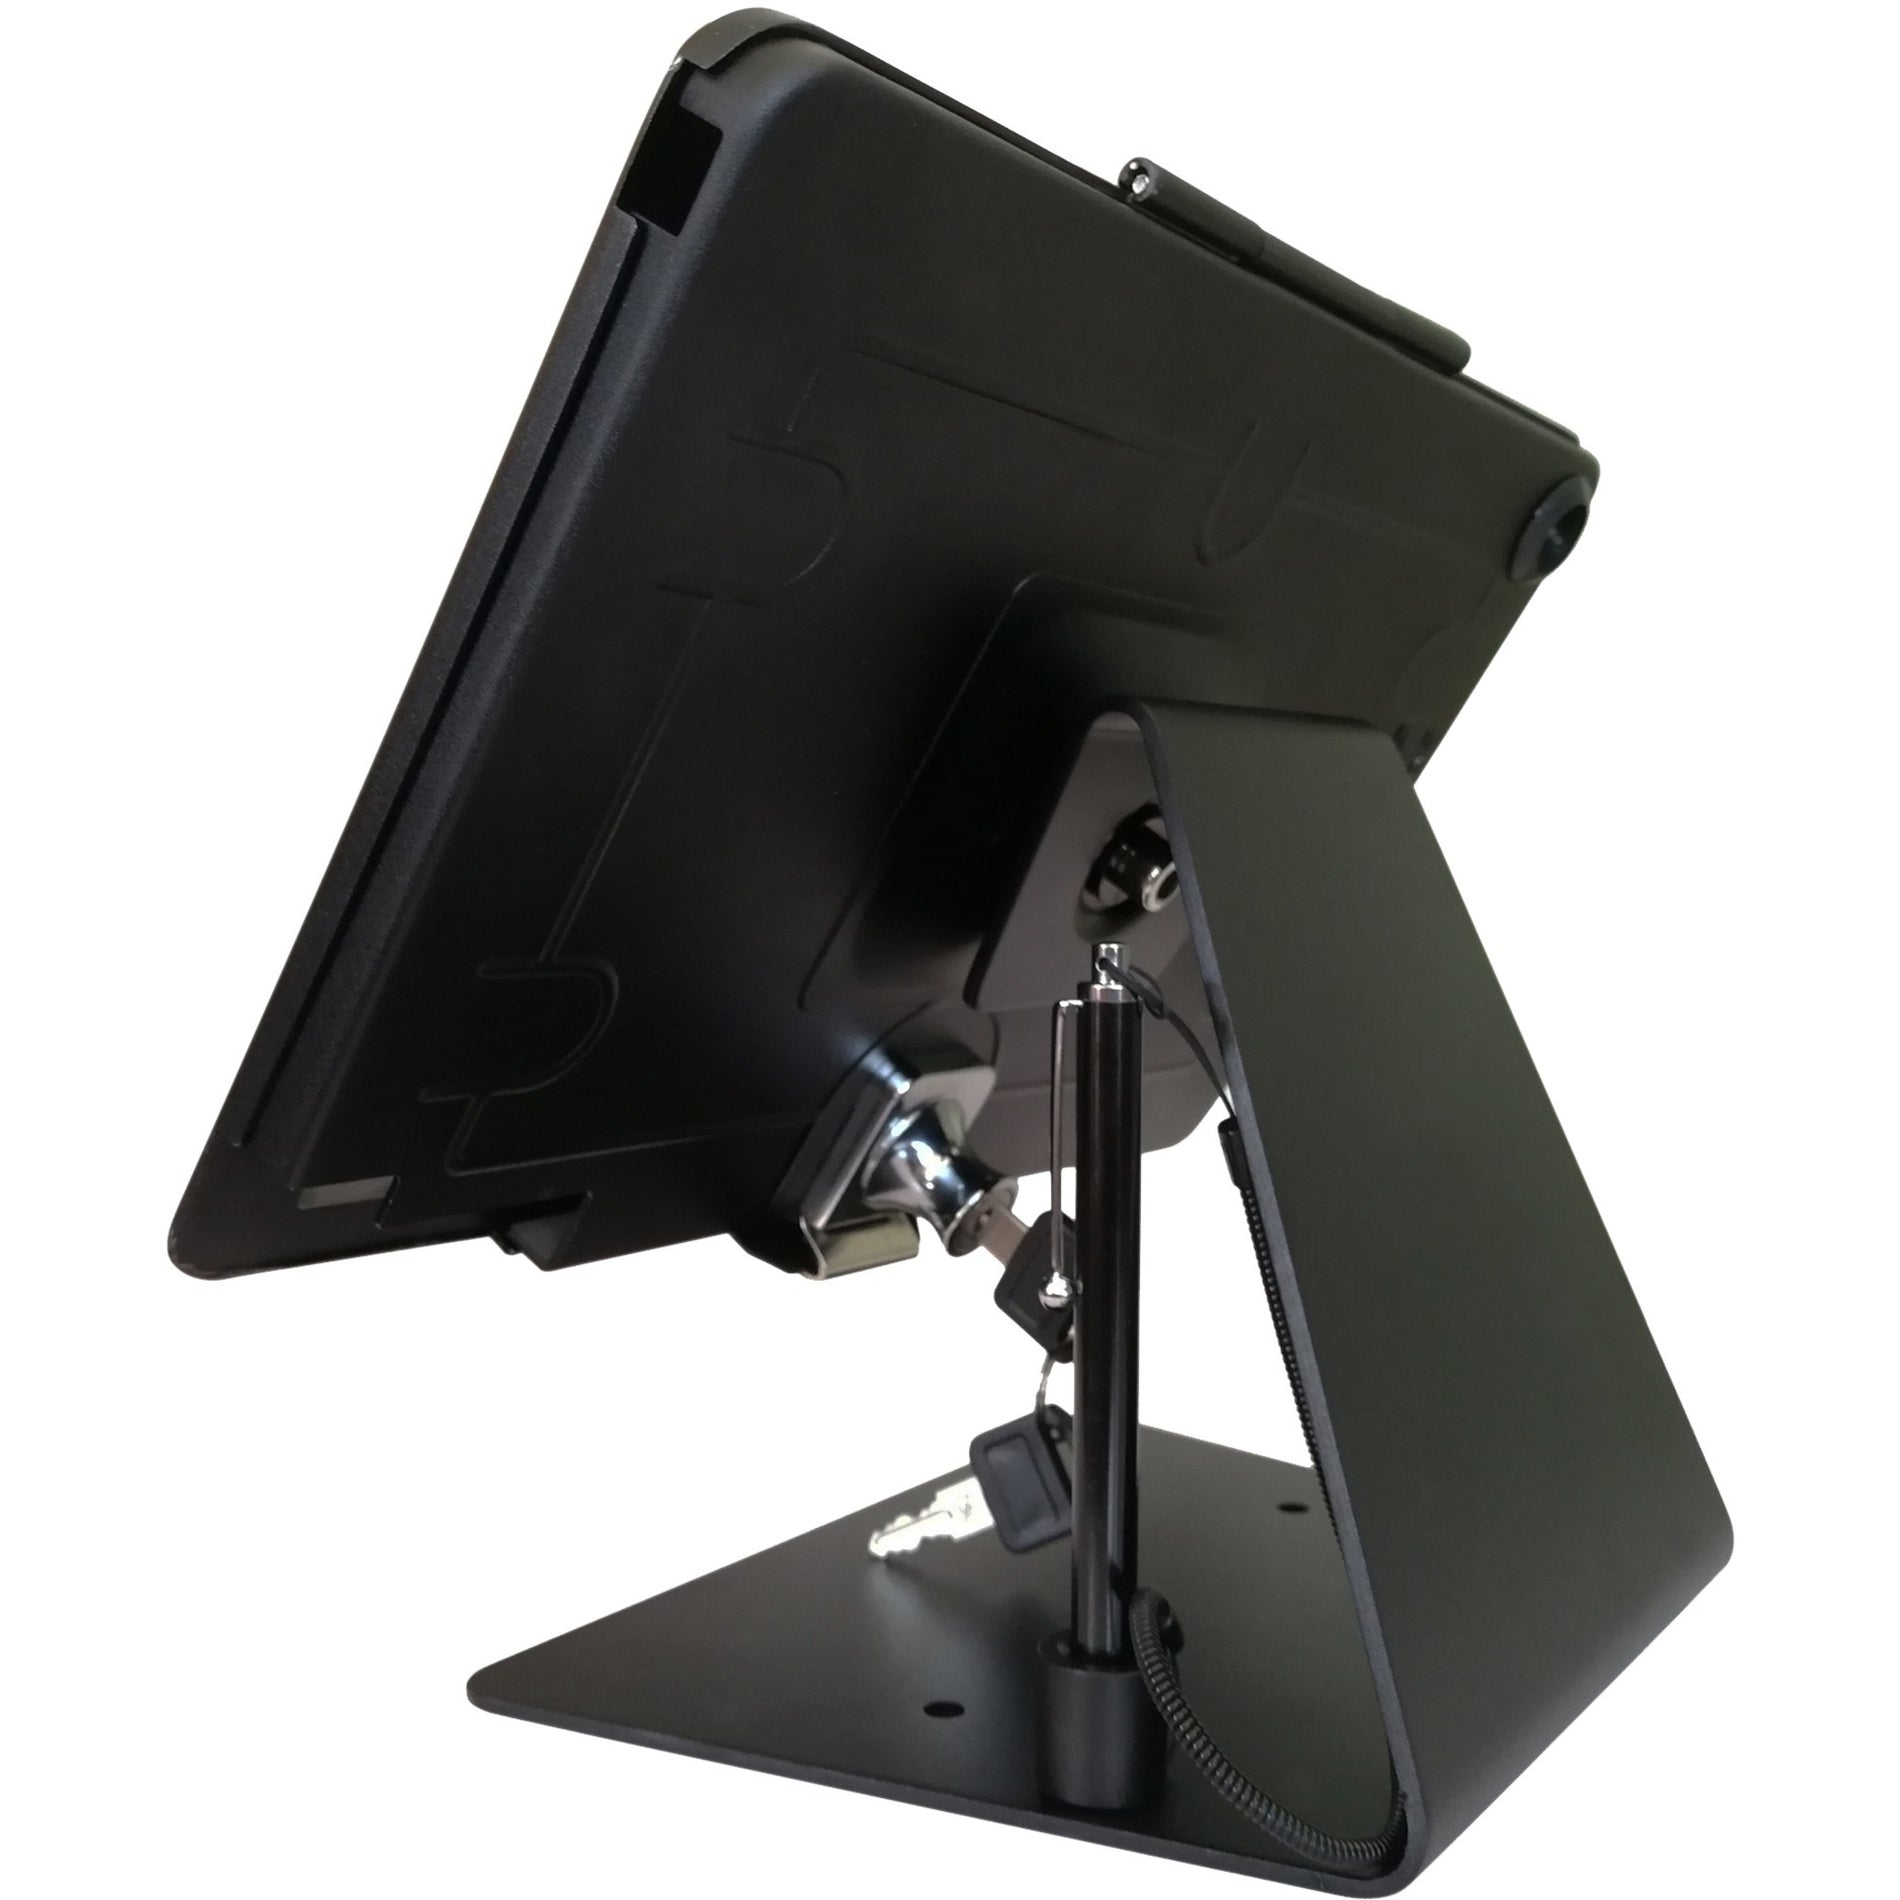 CTA Digital PAD-DASB10 Kiosk Stand, Up to 10.2" Screen Support